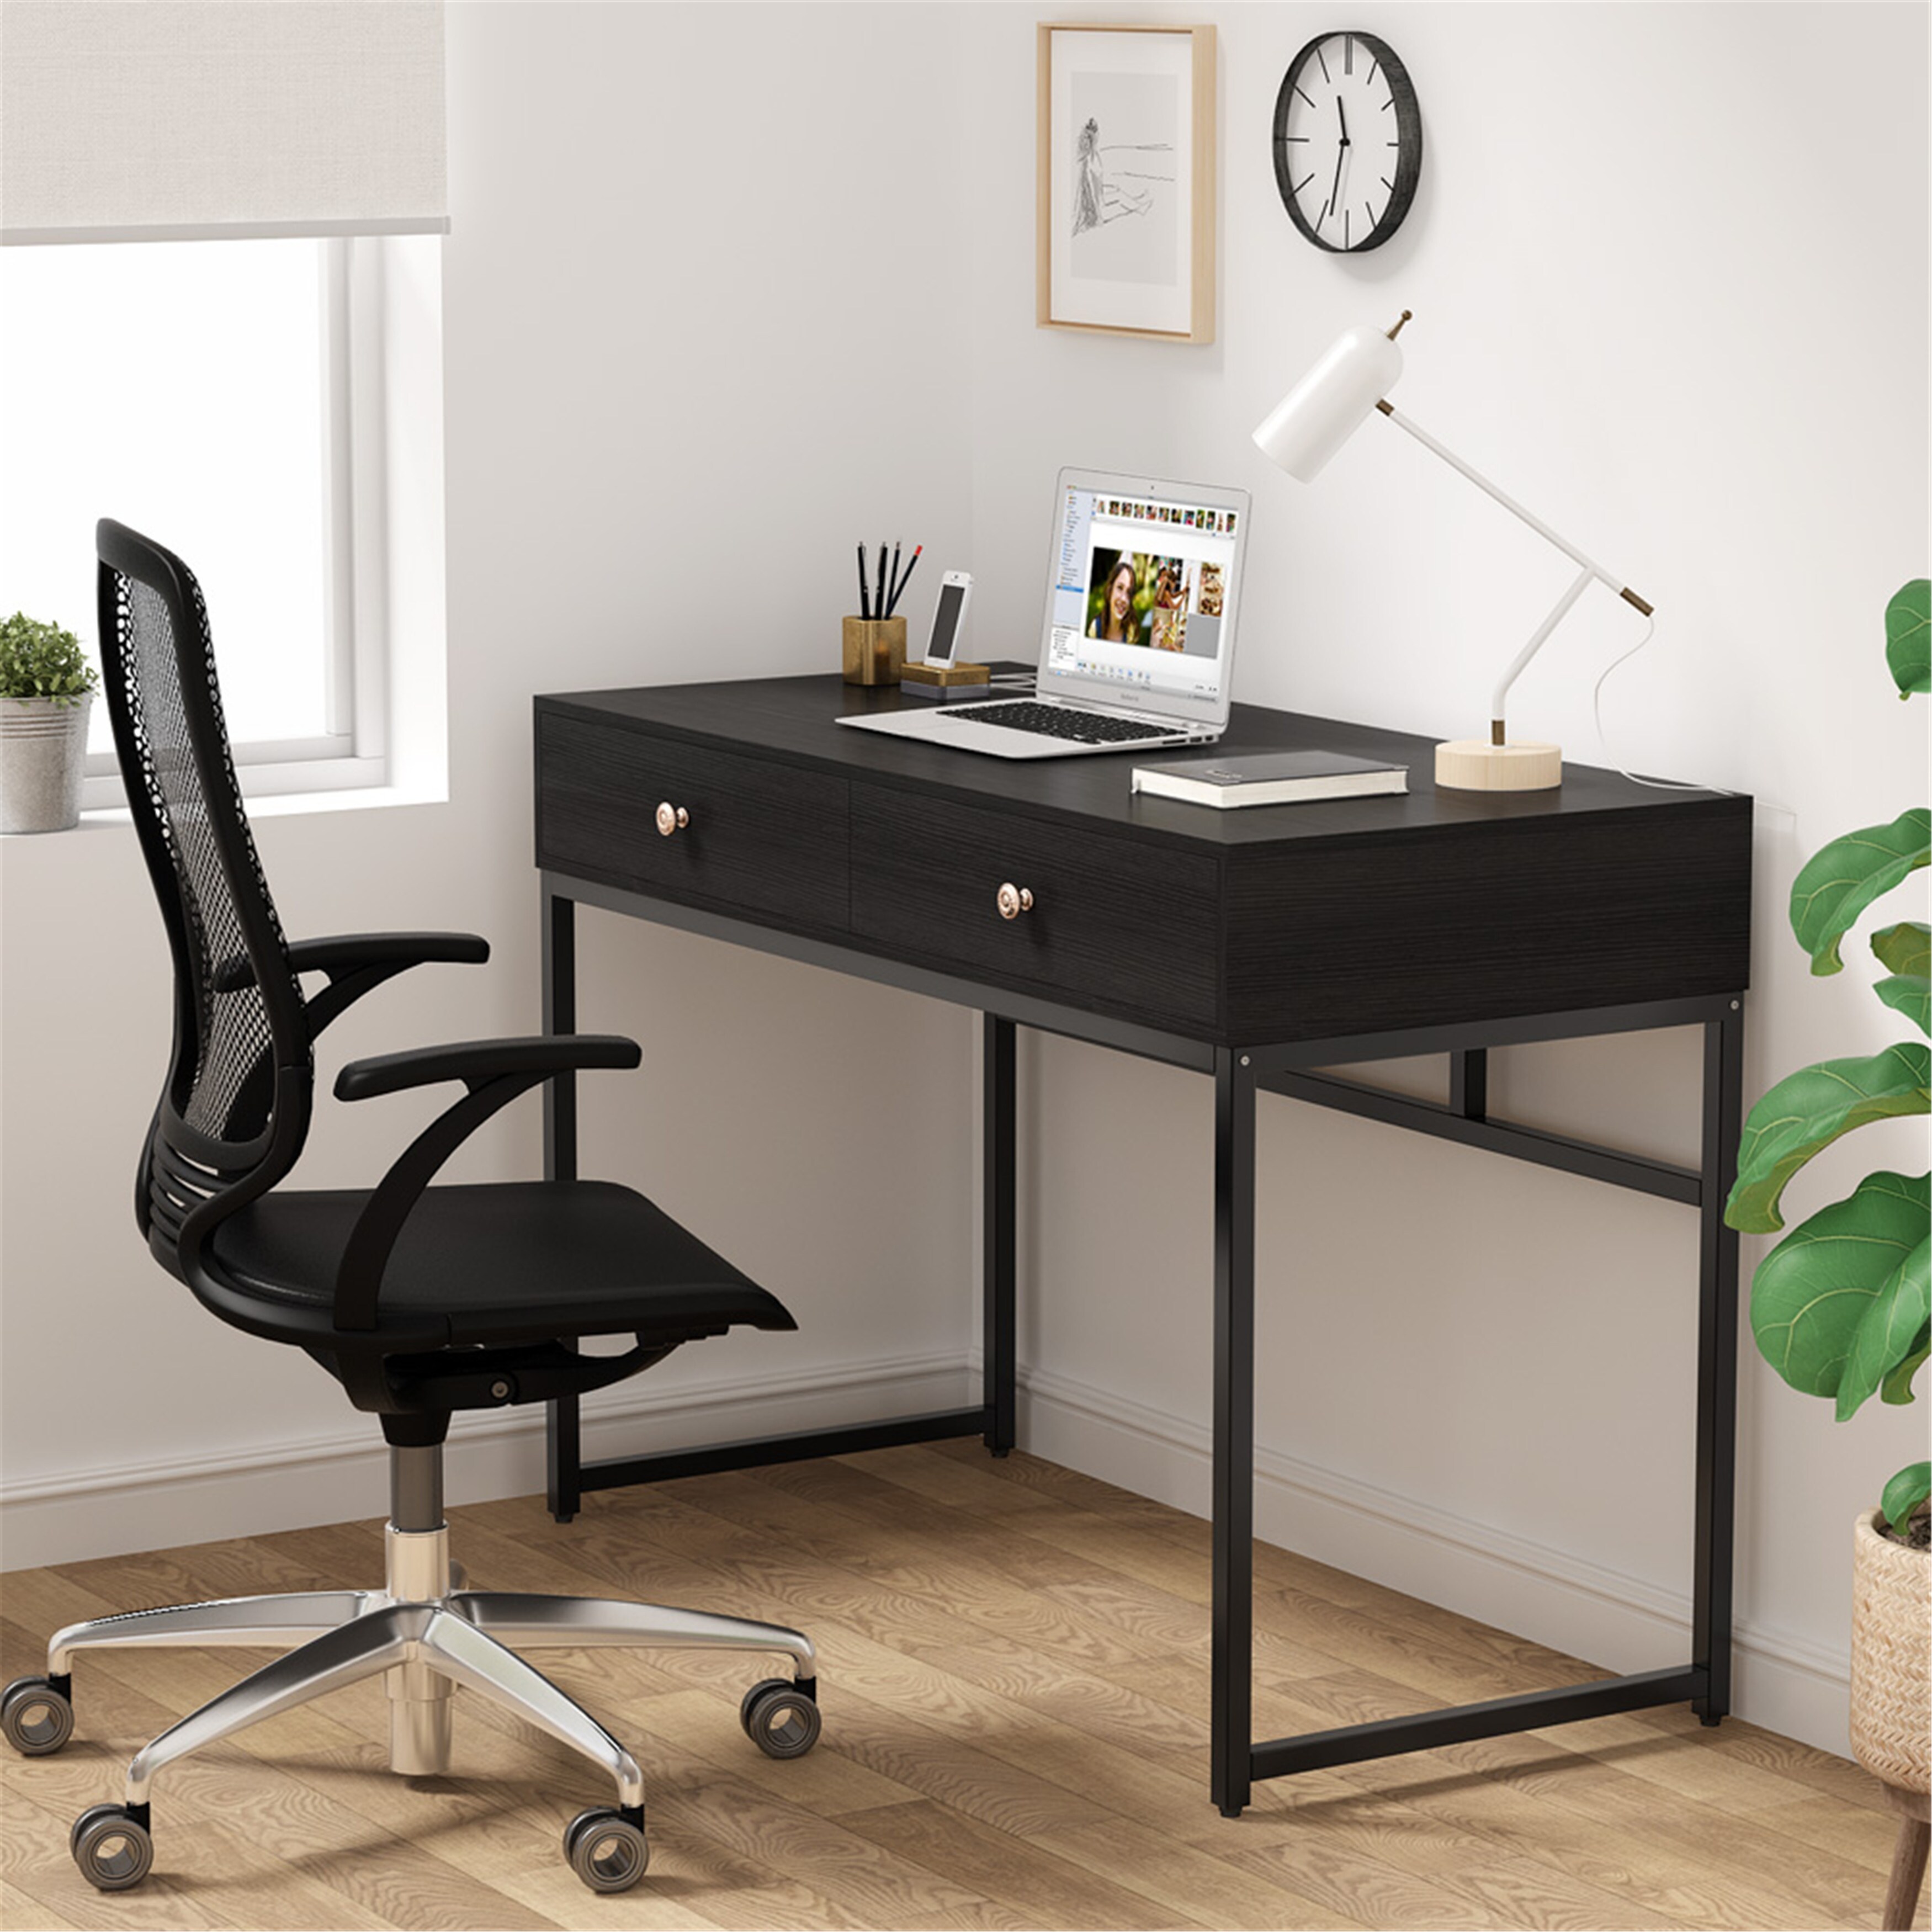 https://ak1.ostkcdn.com/images/products/is/images/direct/854cd2834d10e03710da47f33daea240ee409e52/47-Inches-Computer-Desk-with-2-Drawers%2C-Writing-Desk.jpg